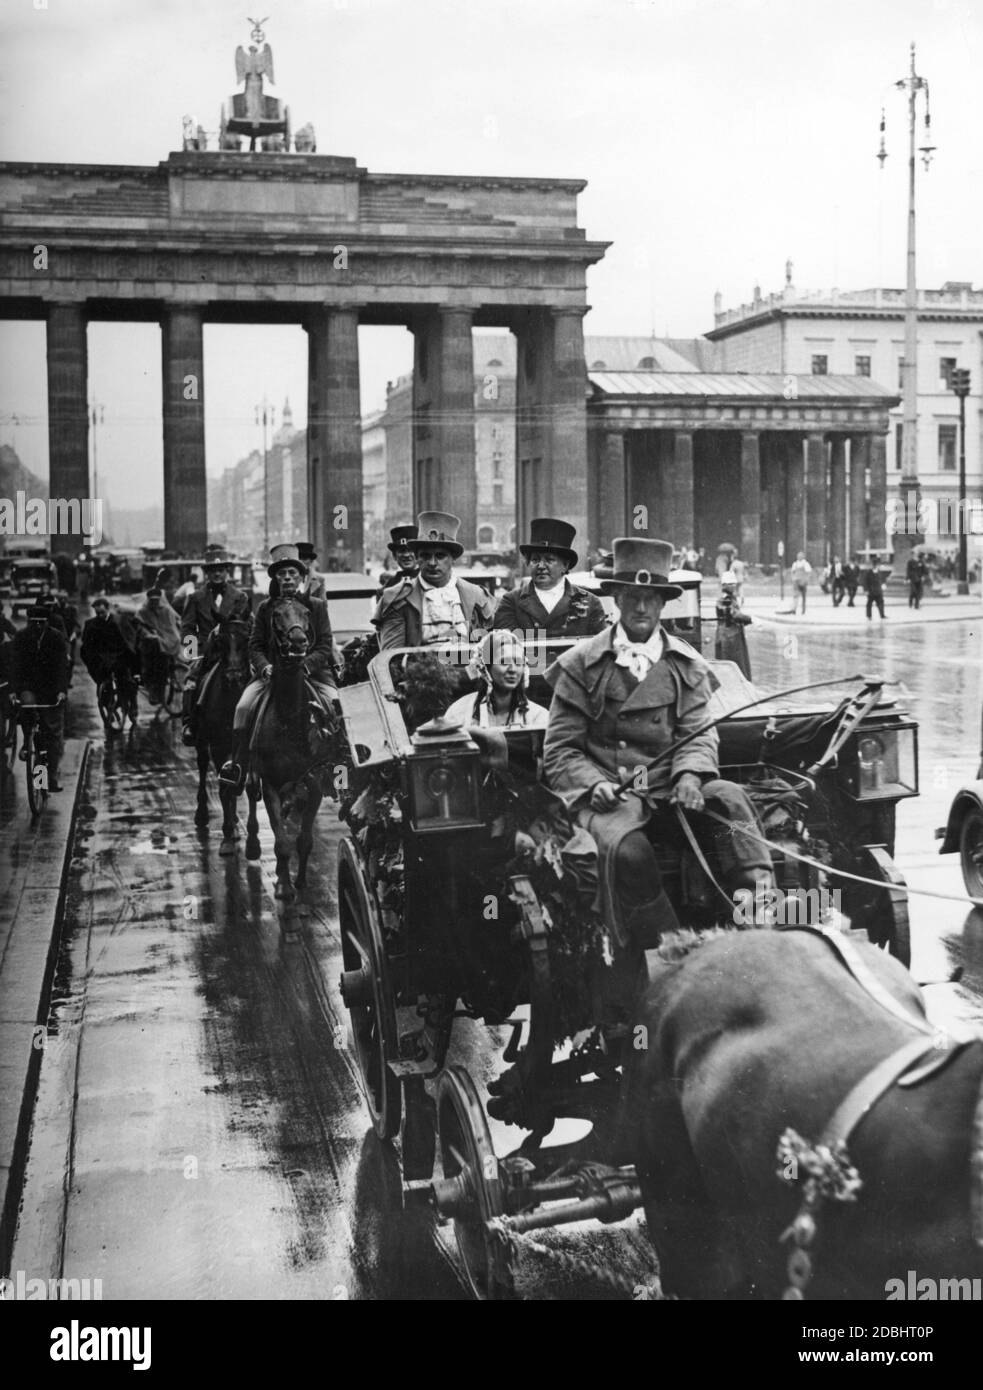 'On Wednesday, July 15, 1936, Goethe's coach drove through many streets in Berlin. It had been brought into the city for the ''Deutschland'' show. The picture shows the historic carriage and its passengers in Biedermeier costume on the East-West axis (today: Strasse des 17. Juni) at the Brandenburg Gate.' Stock Photo